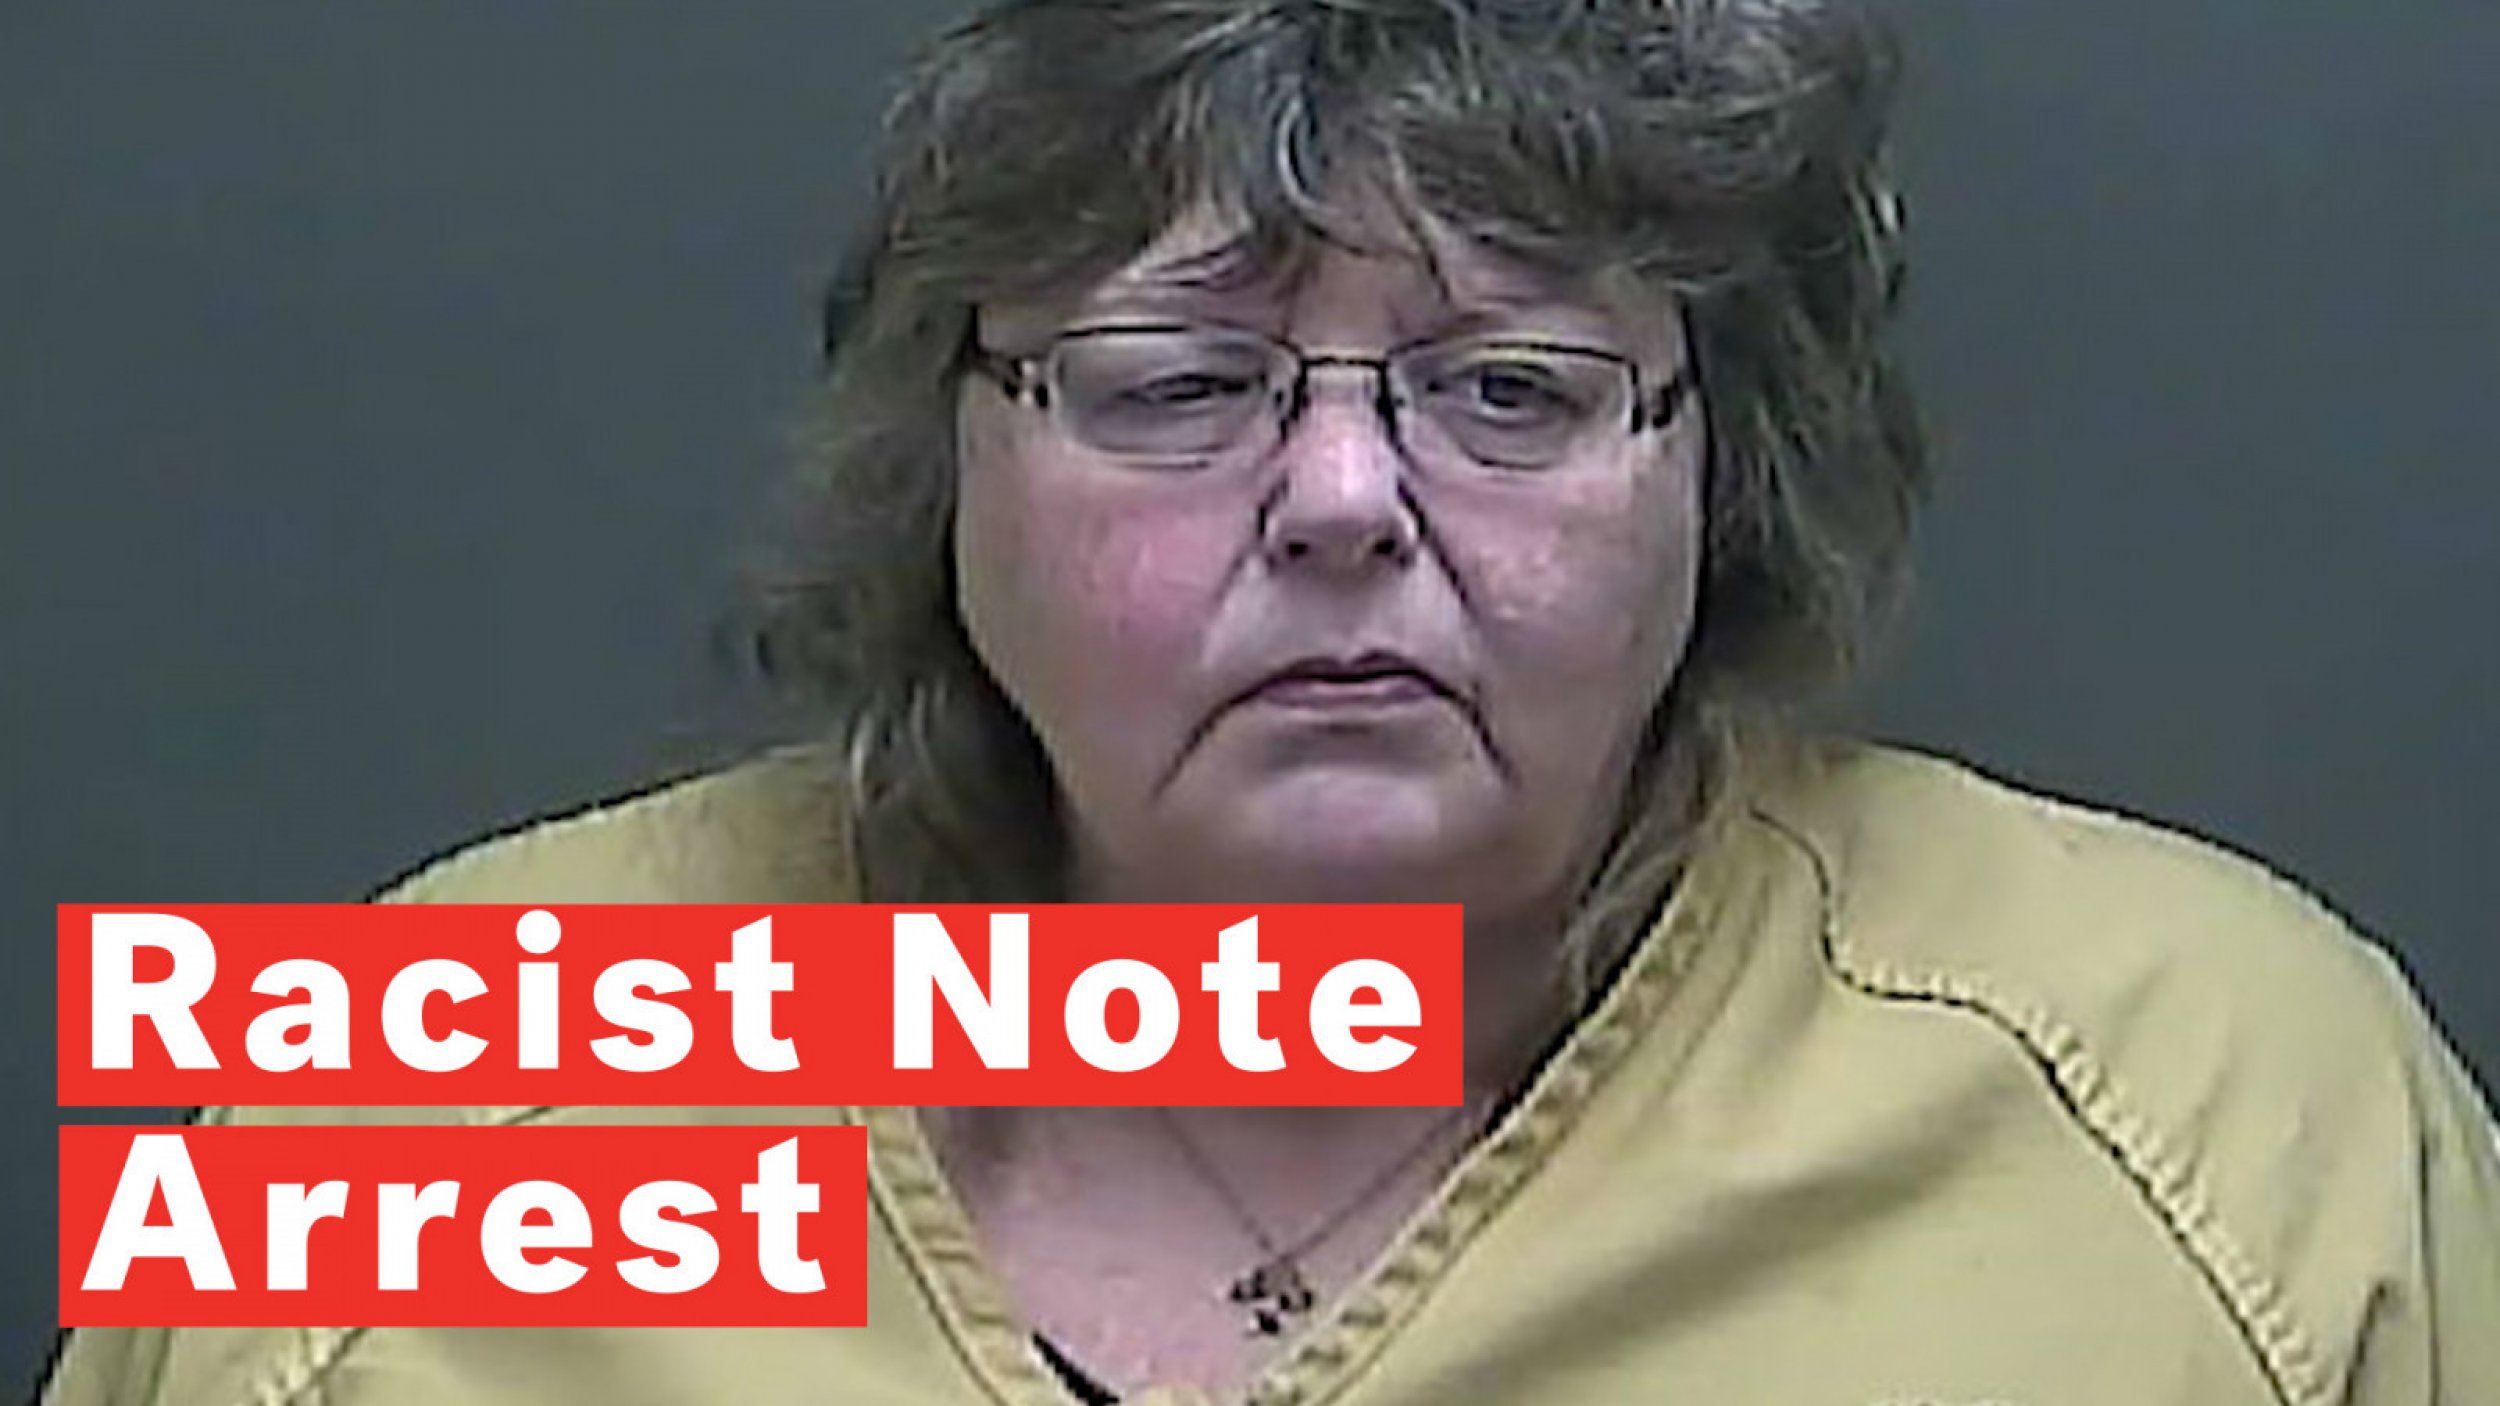 Indiana Woman Arrested For Writing Racist Note